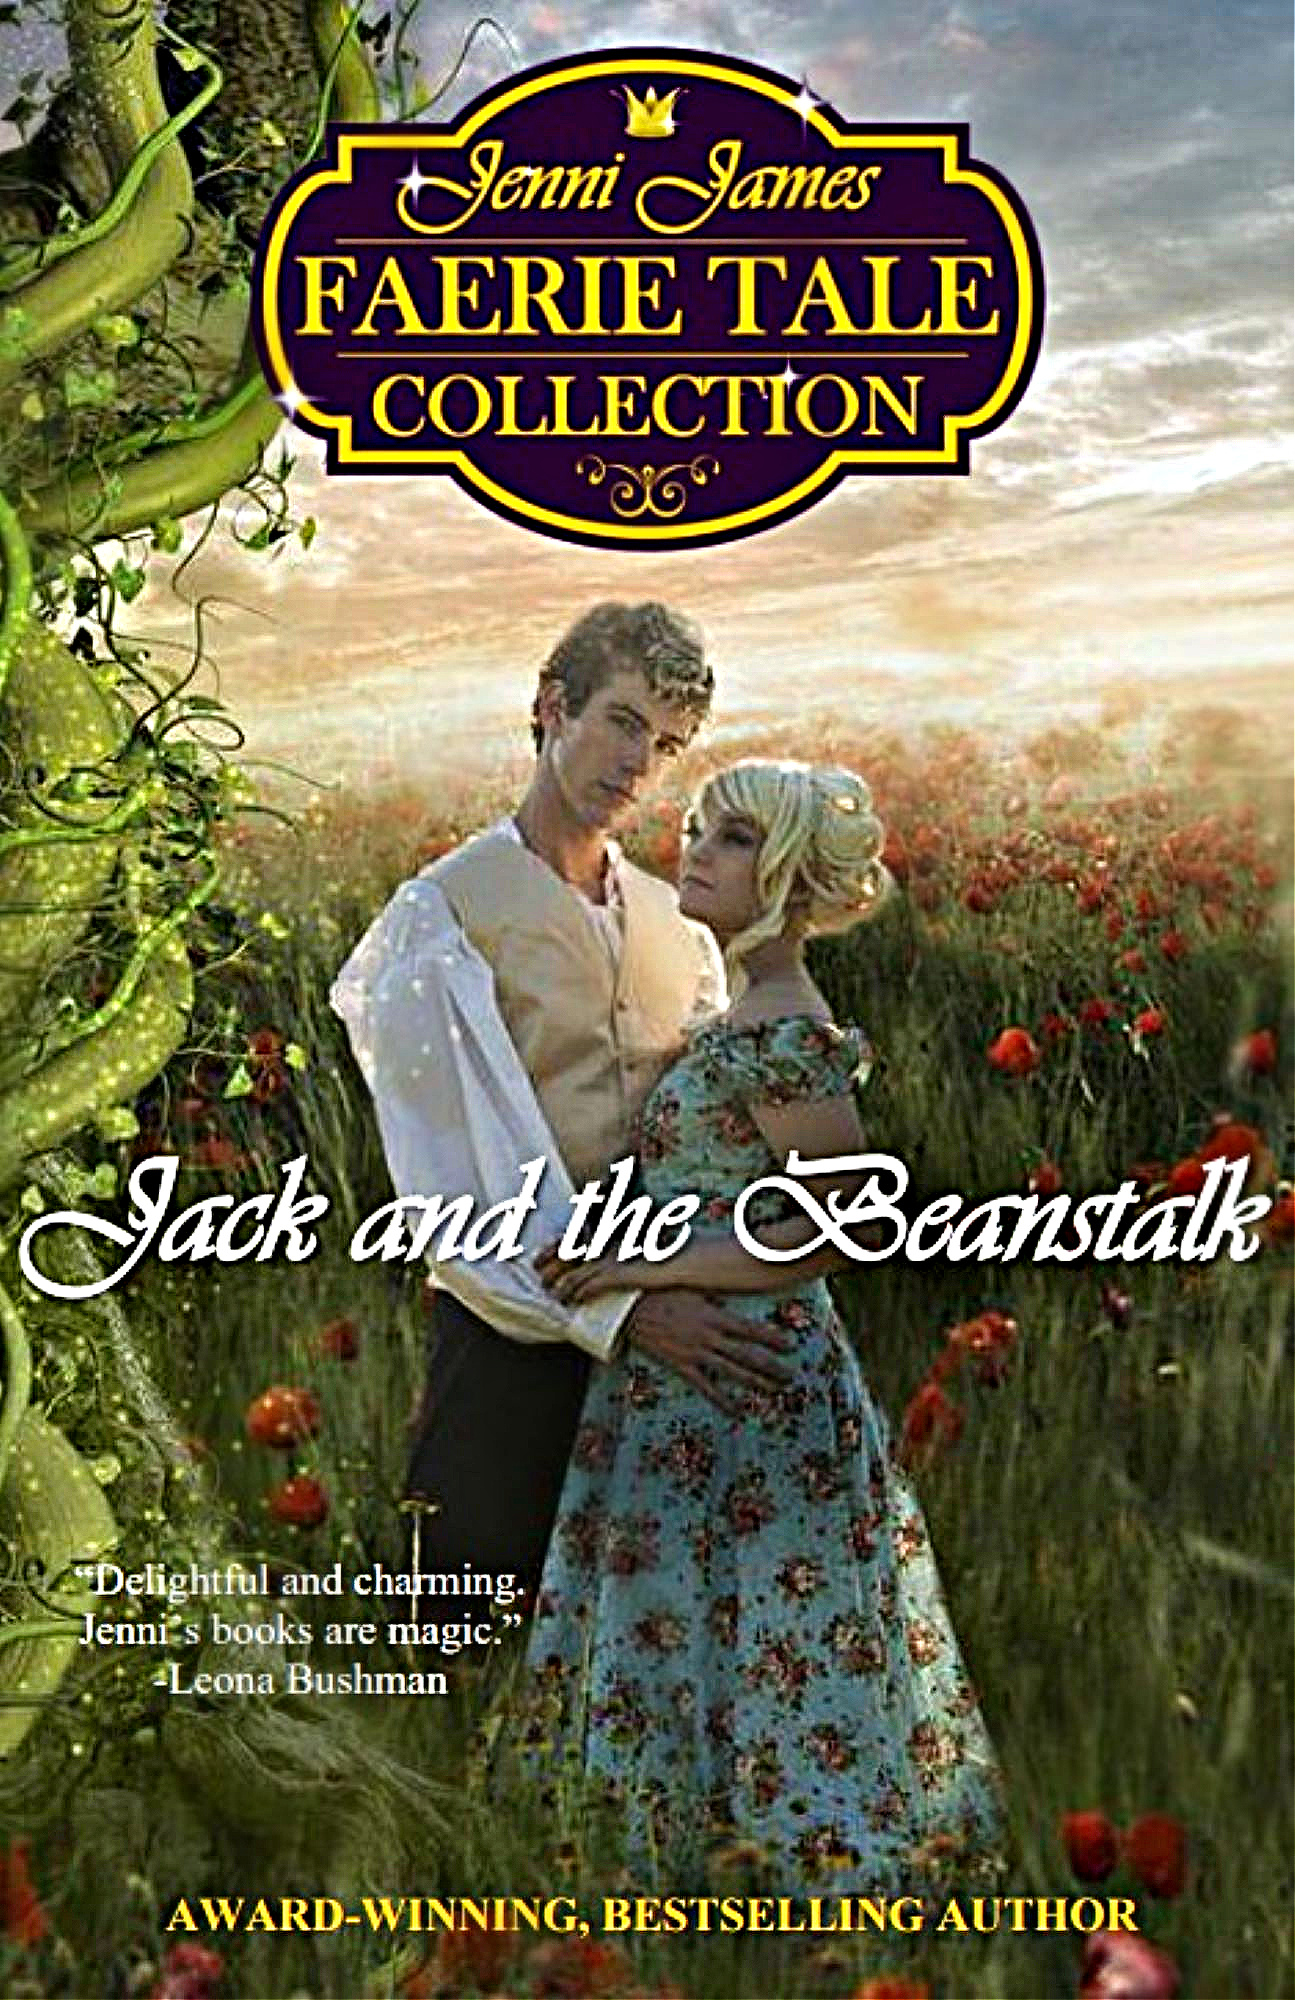 Faerie Tale Collection